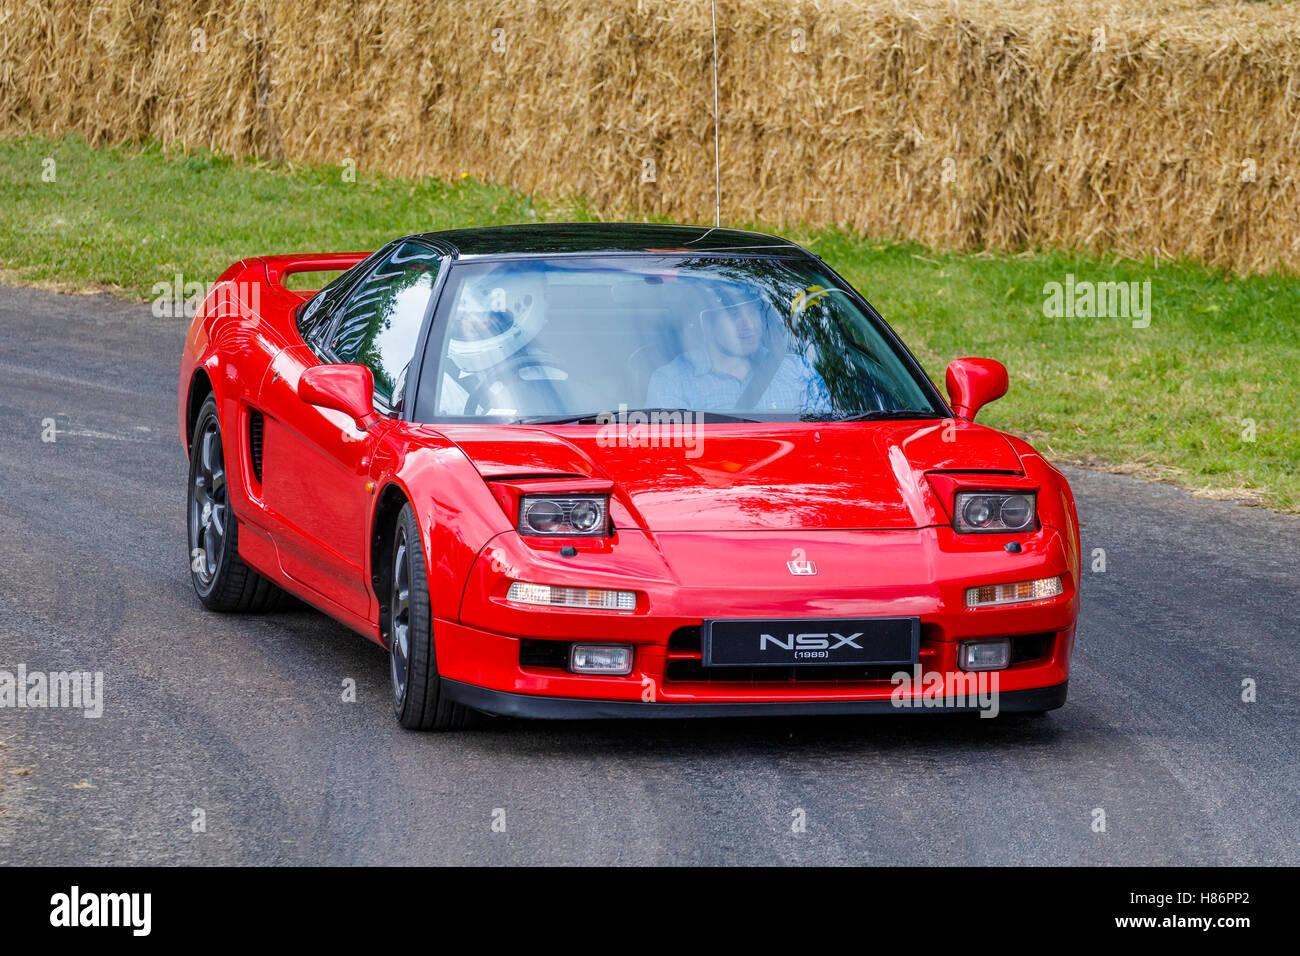 1989 Honda NSX sports car at the 2016 Goodwood Festival of Speed, Sussex, UK Stock Photo